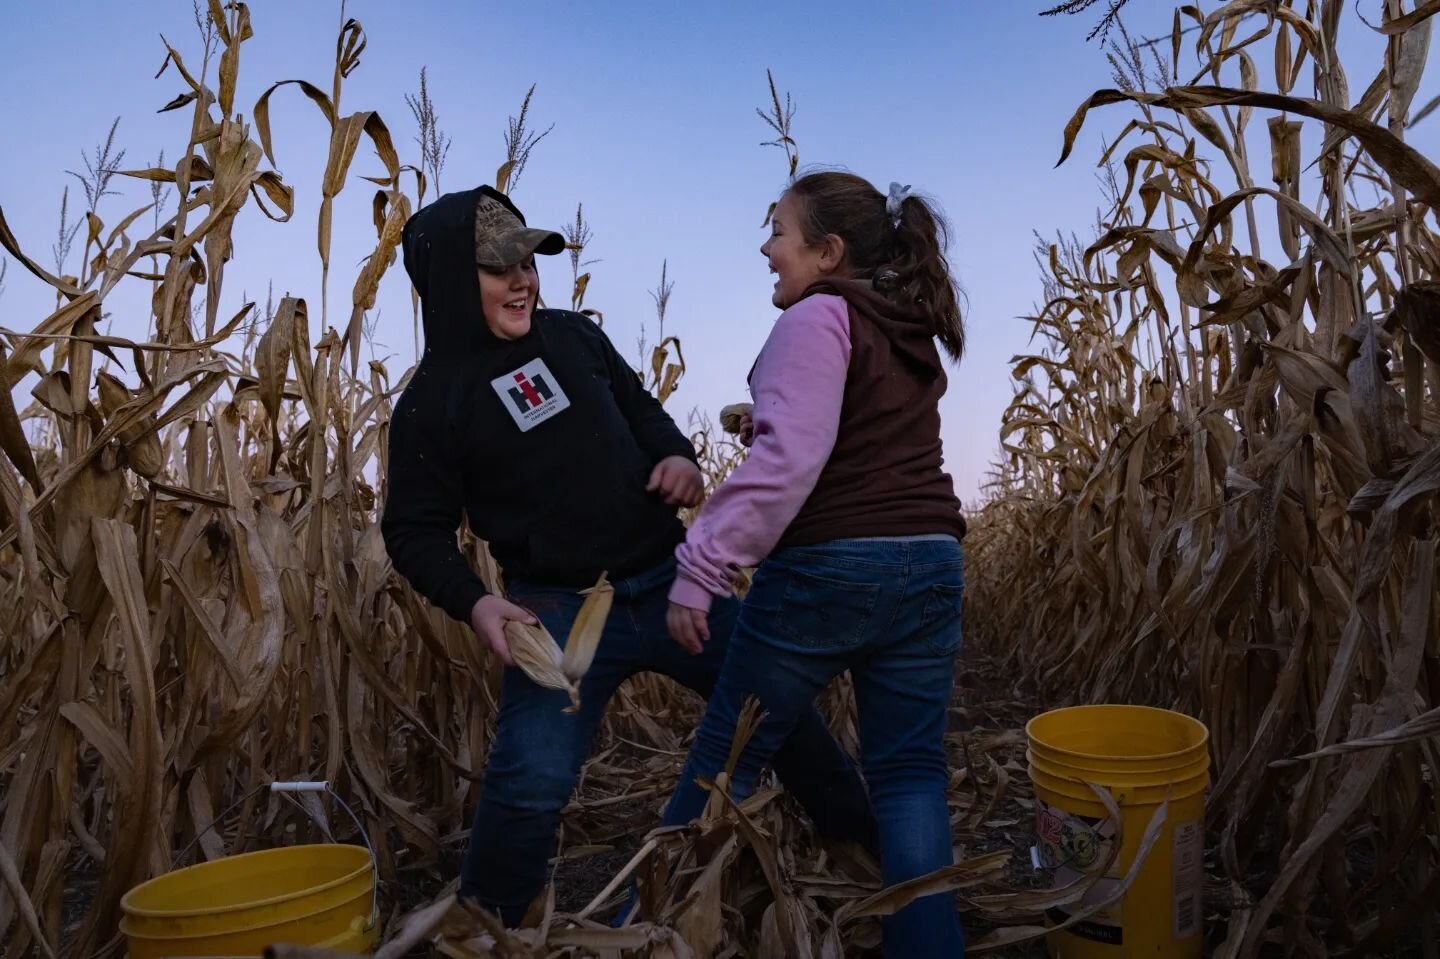 Taking a break from picking deer corn, Luke, 11, and Layna, 9, enjoy a bit of old fashioned fun between a day of school and an evening of hard work on the farm. A little over excitement provides the oldest sibling, Laurel, 22,  an opportunity to teac